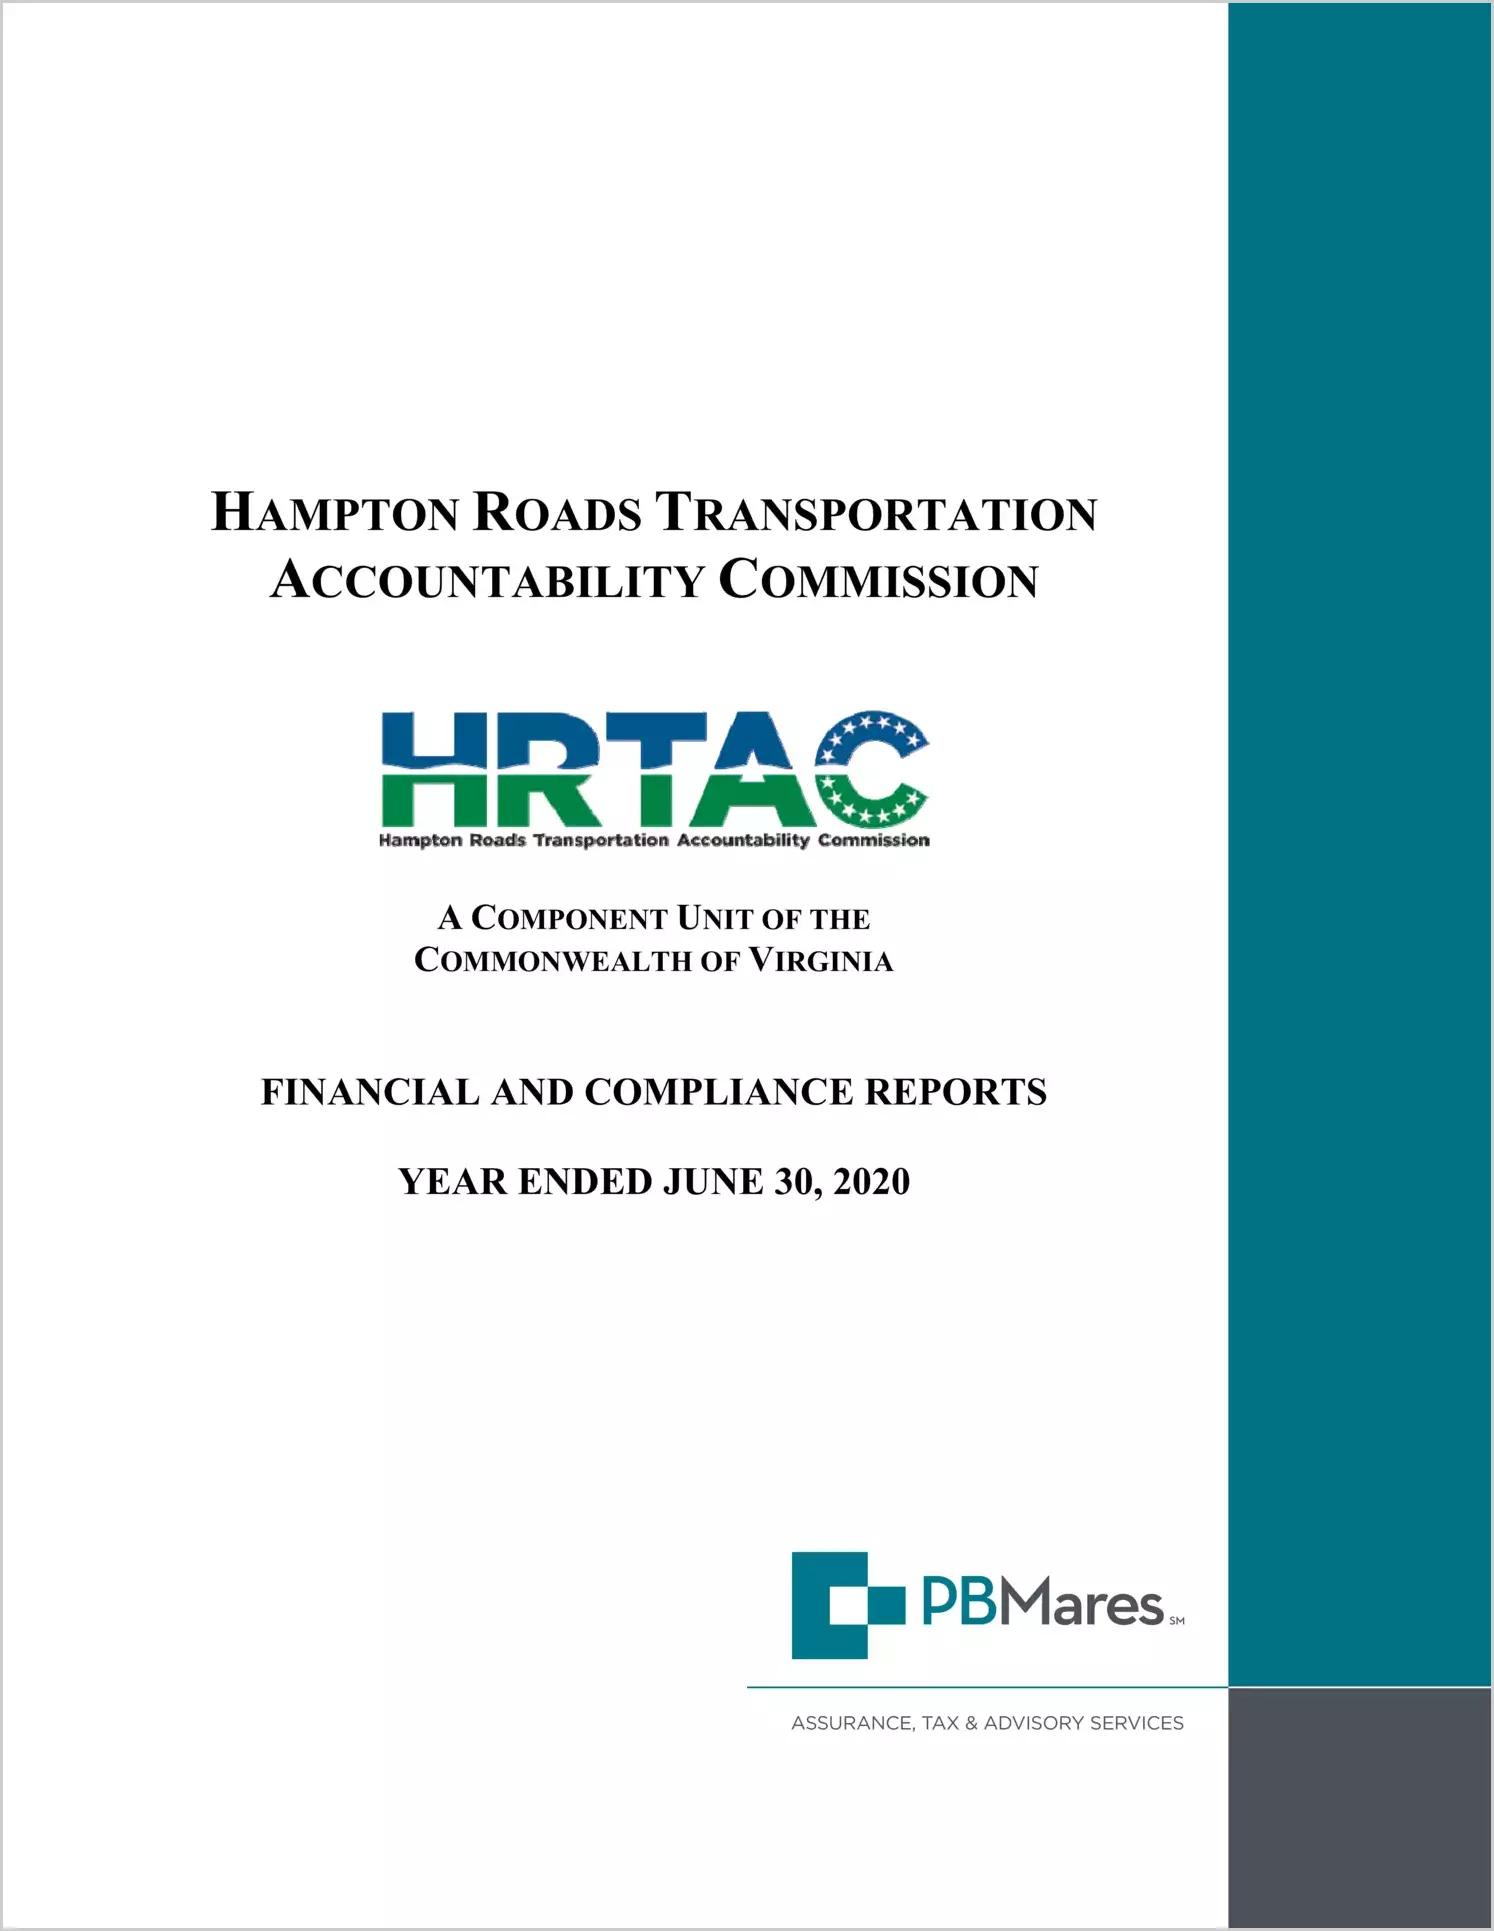 Hampton Roads Transportation Accountability Commission for the year ended June 30, 2020